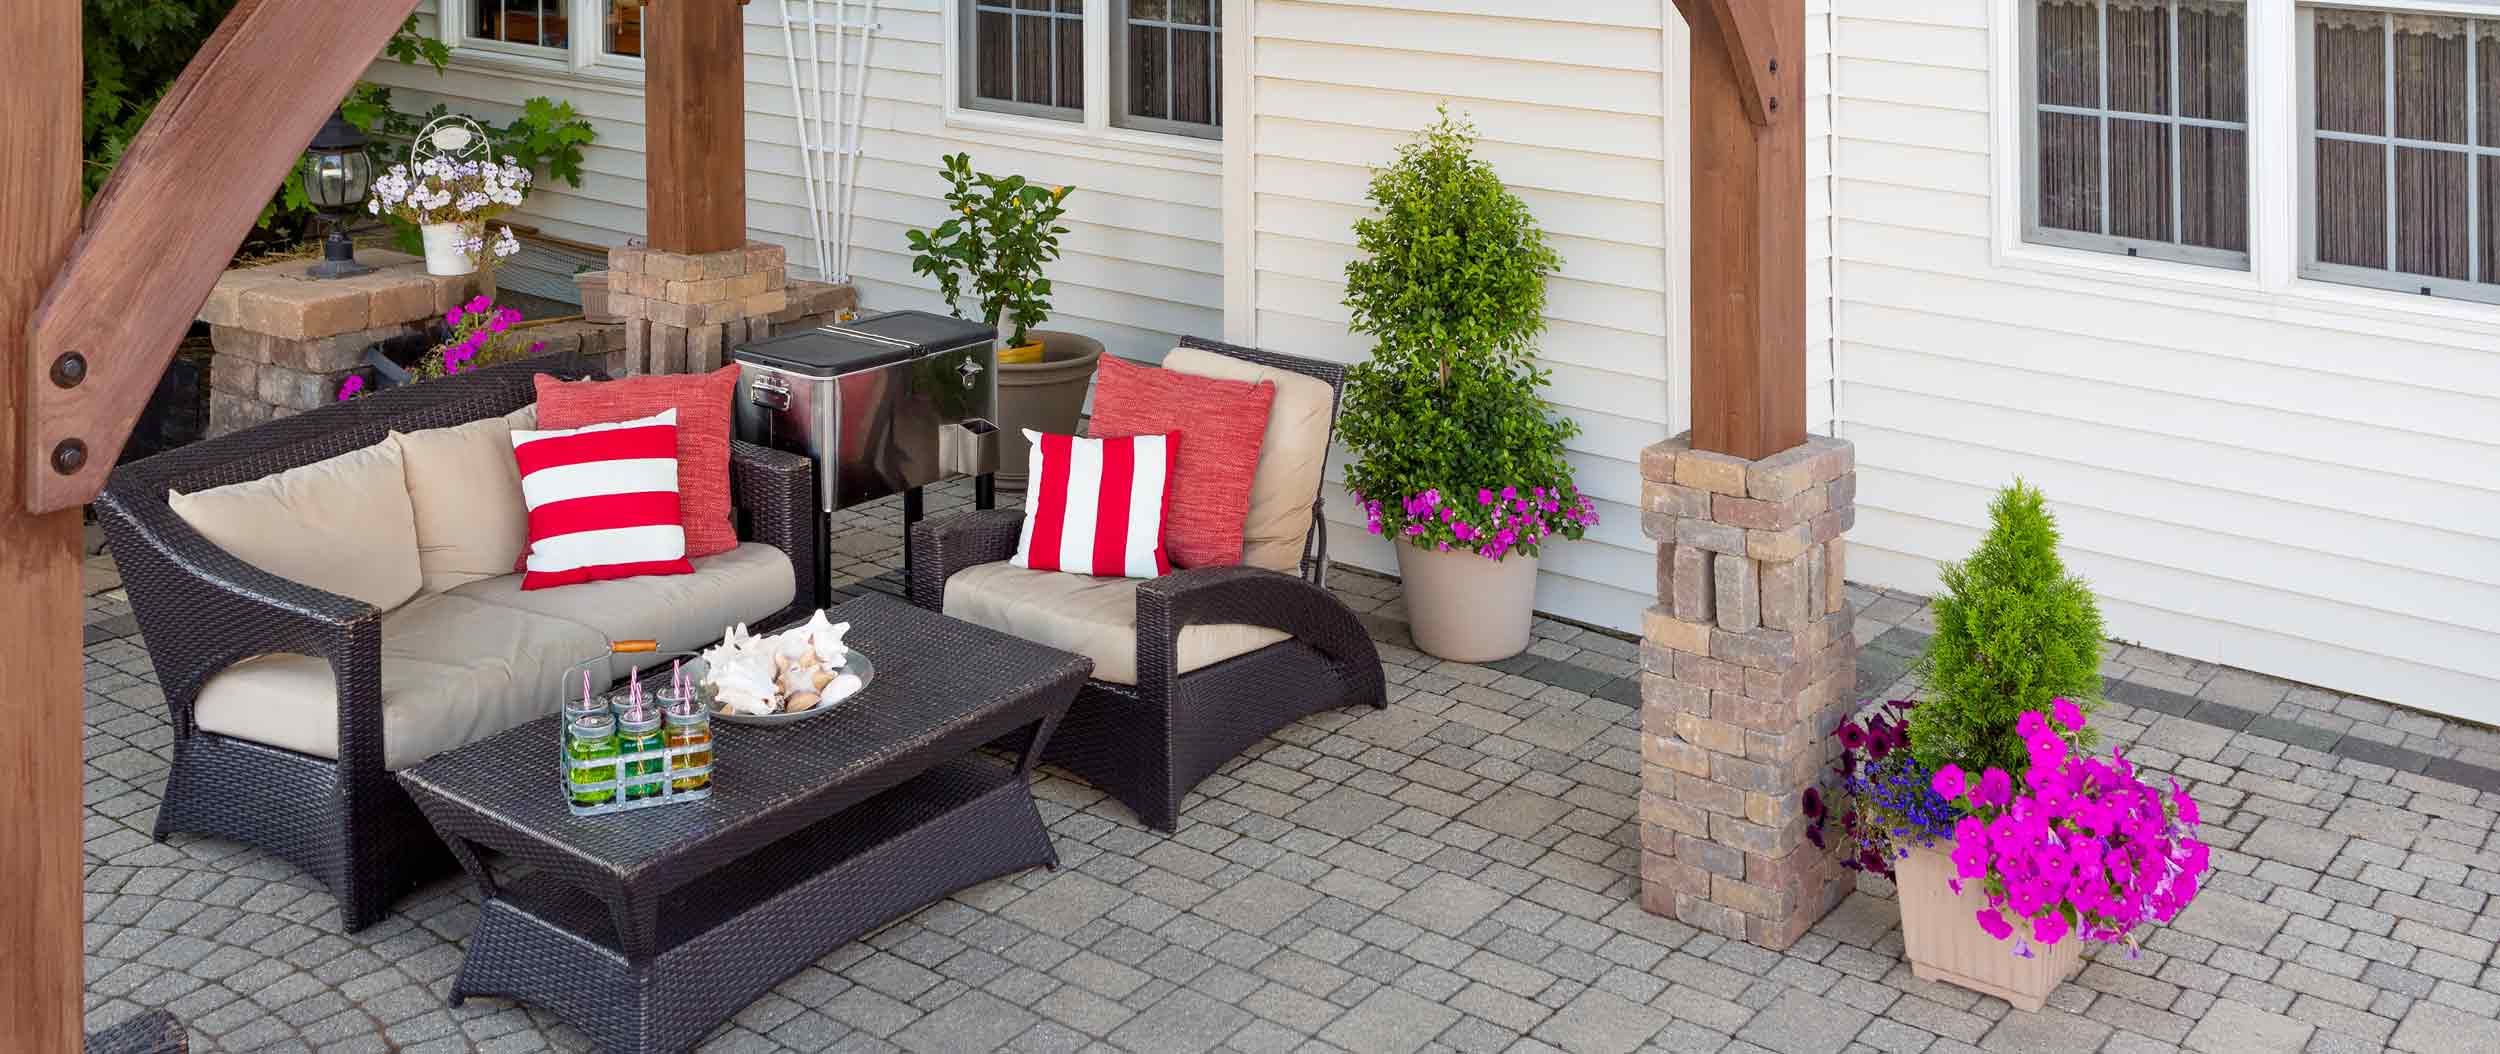 Paver patio with pergola by Finer Lawn & Landscaping